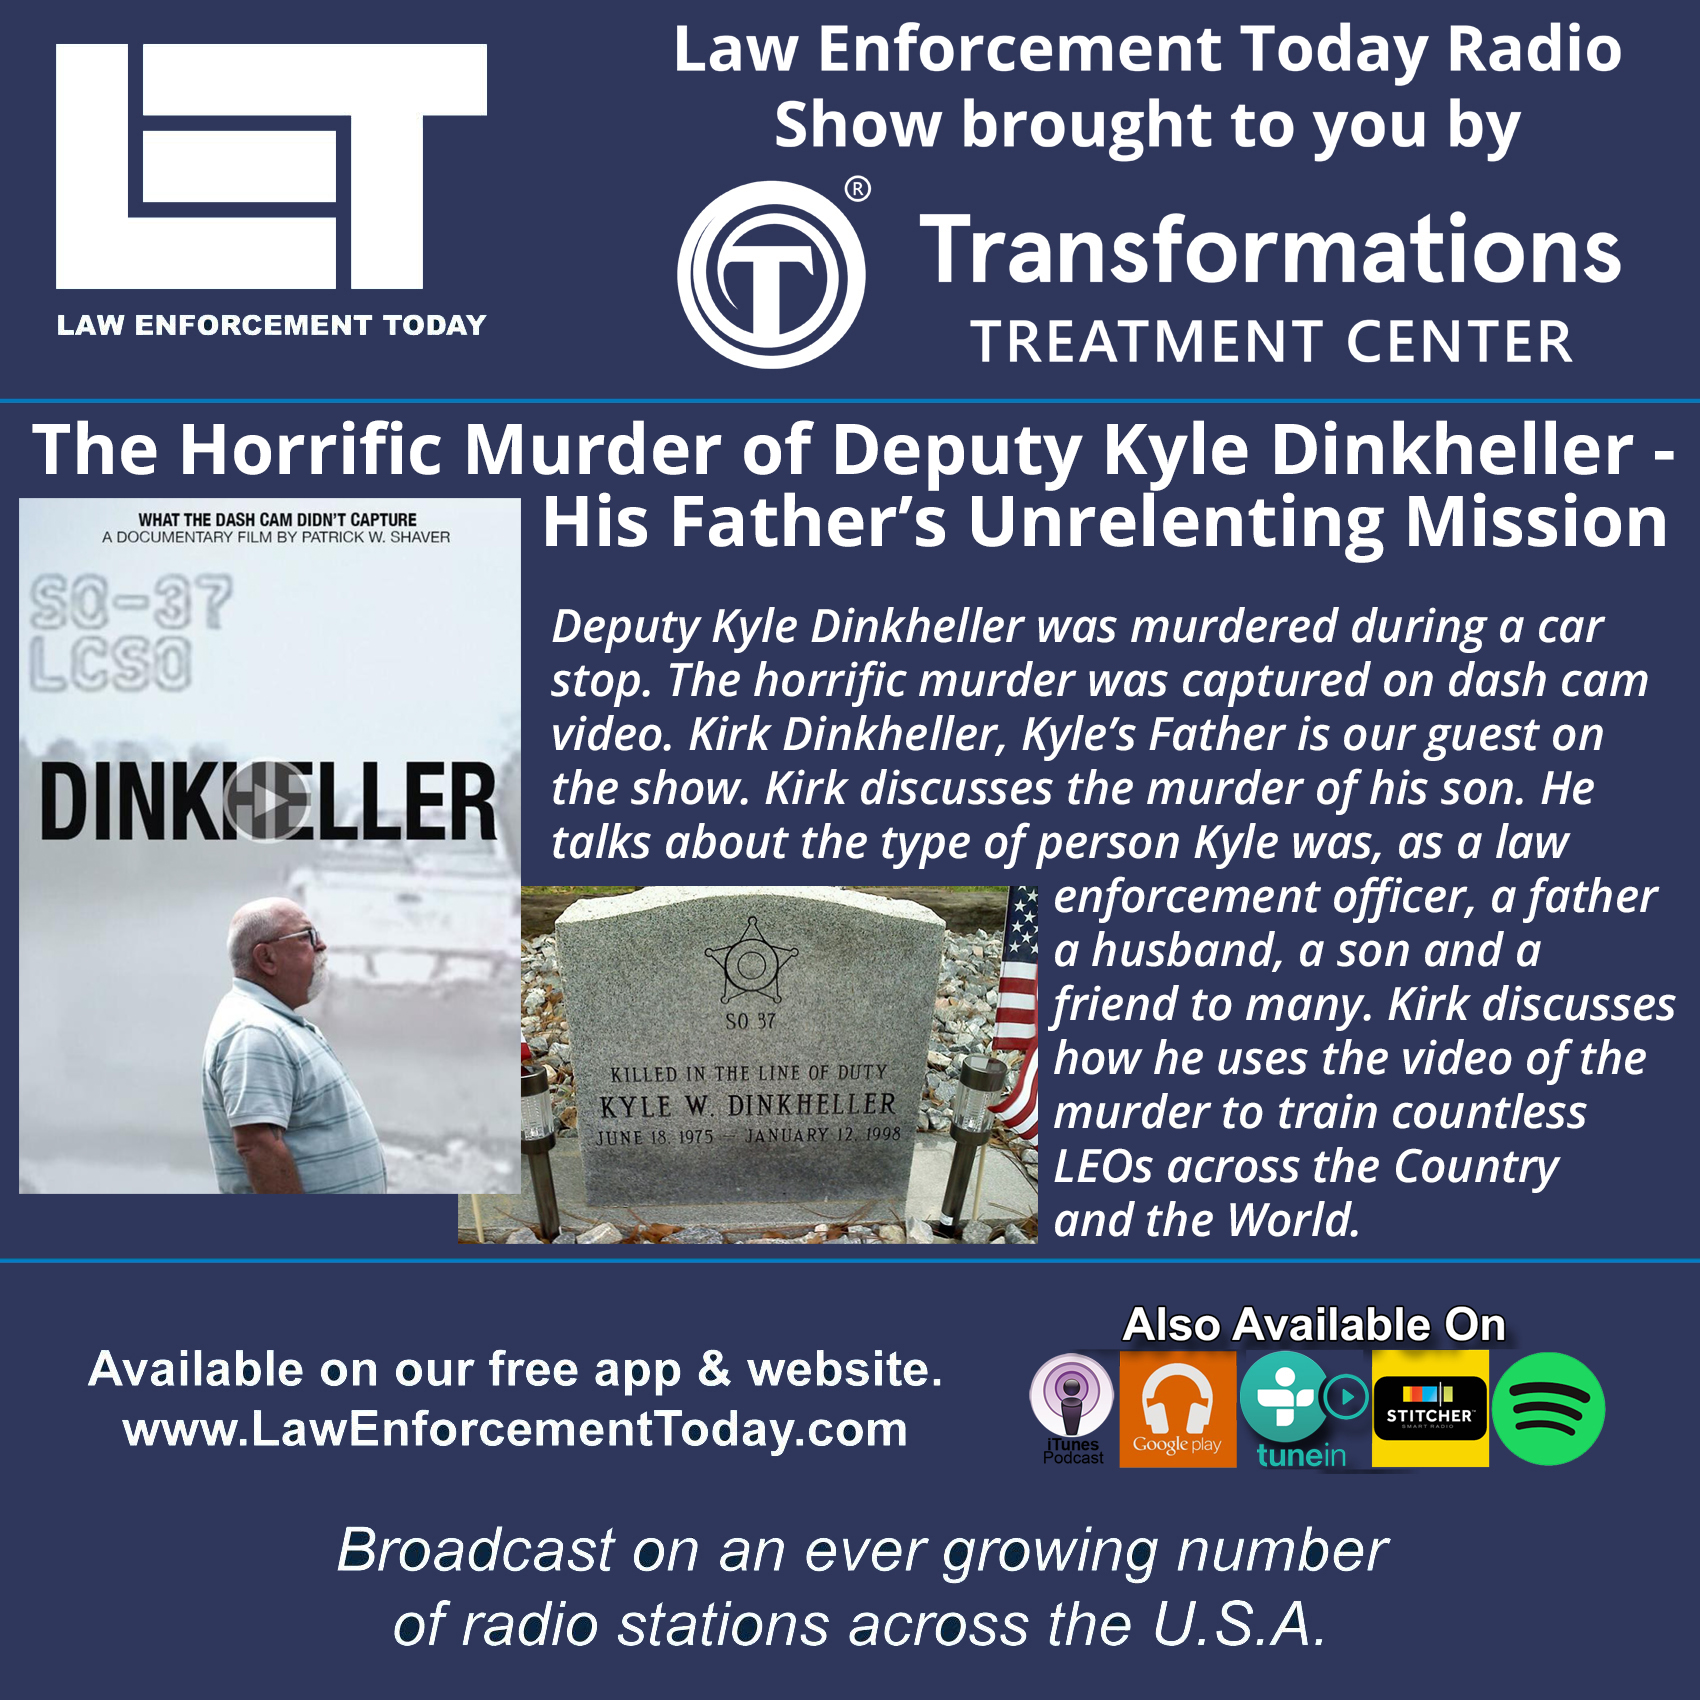 S3E81: Murder of Deputy Kyle Dinkheller - His Father's Mission